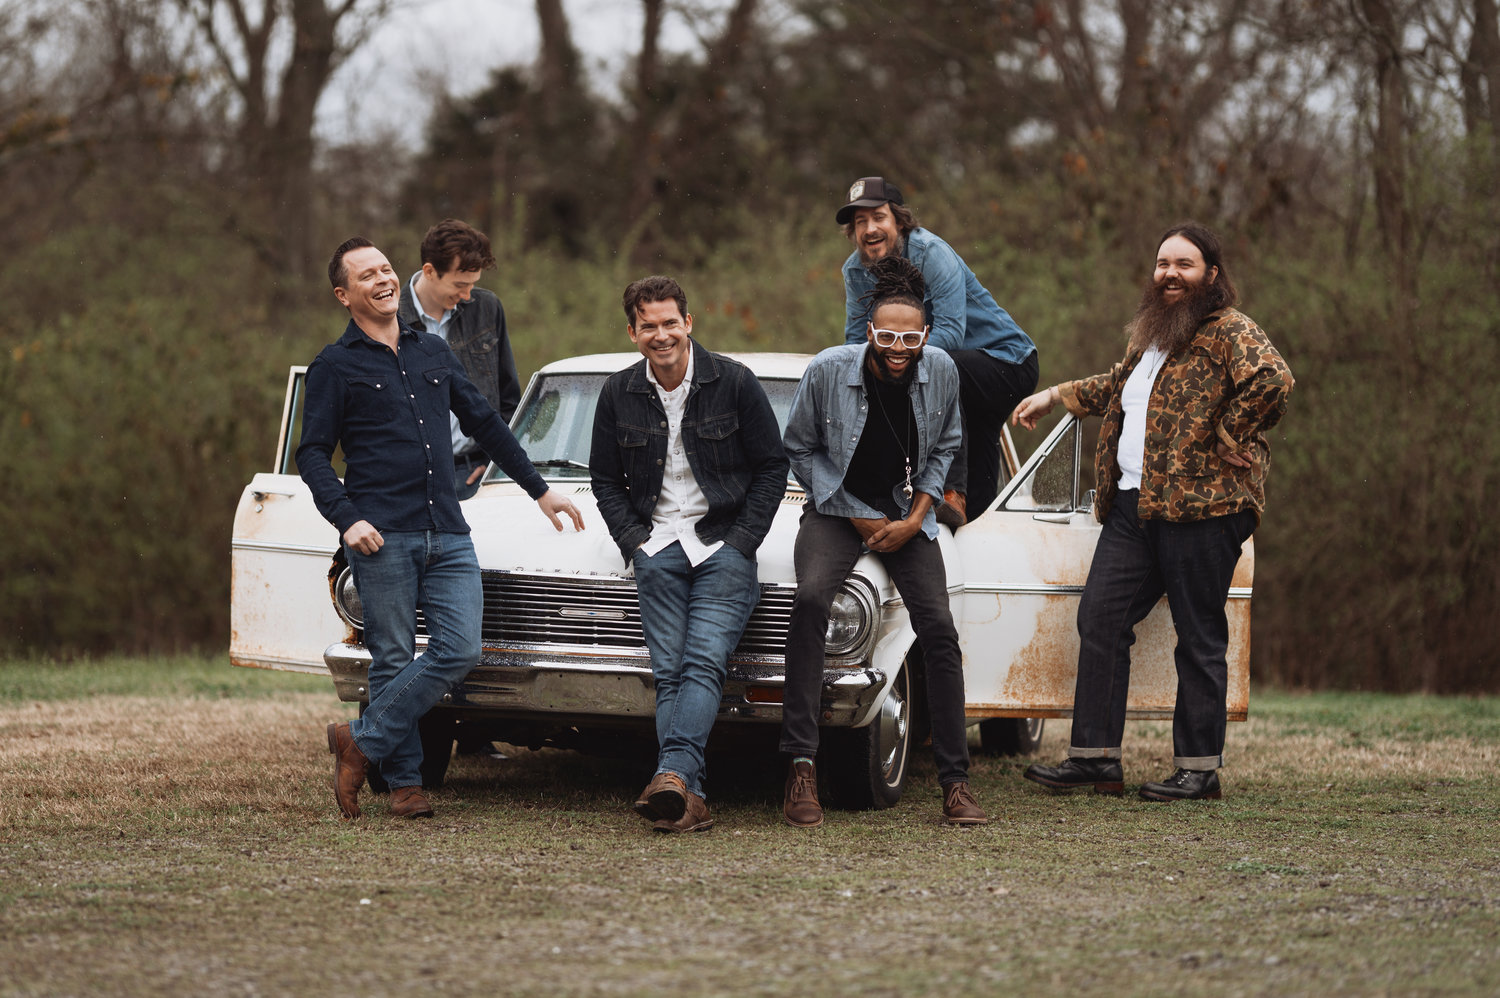 Special guest Old Crow Medicine Show will perform with Hank Williams Jr. May 13.